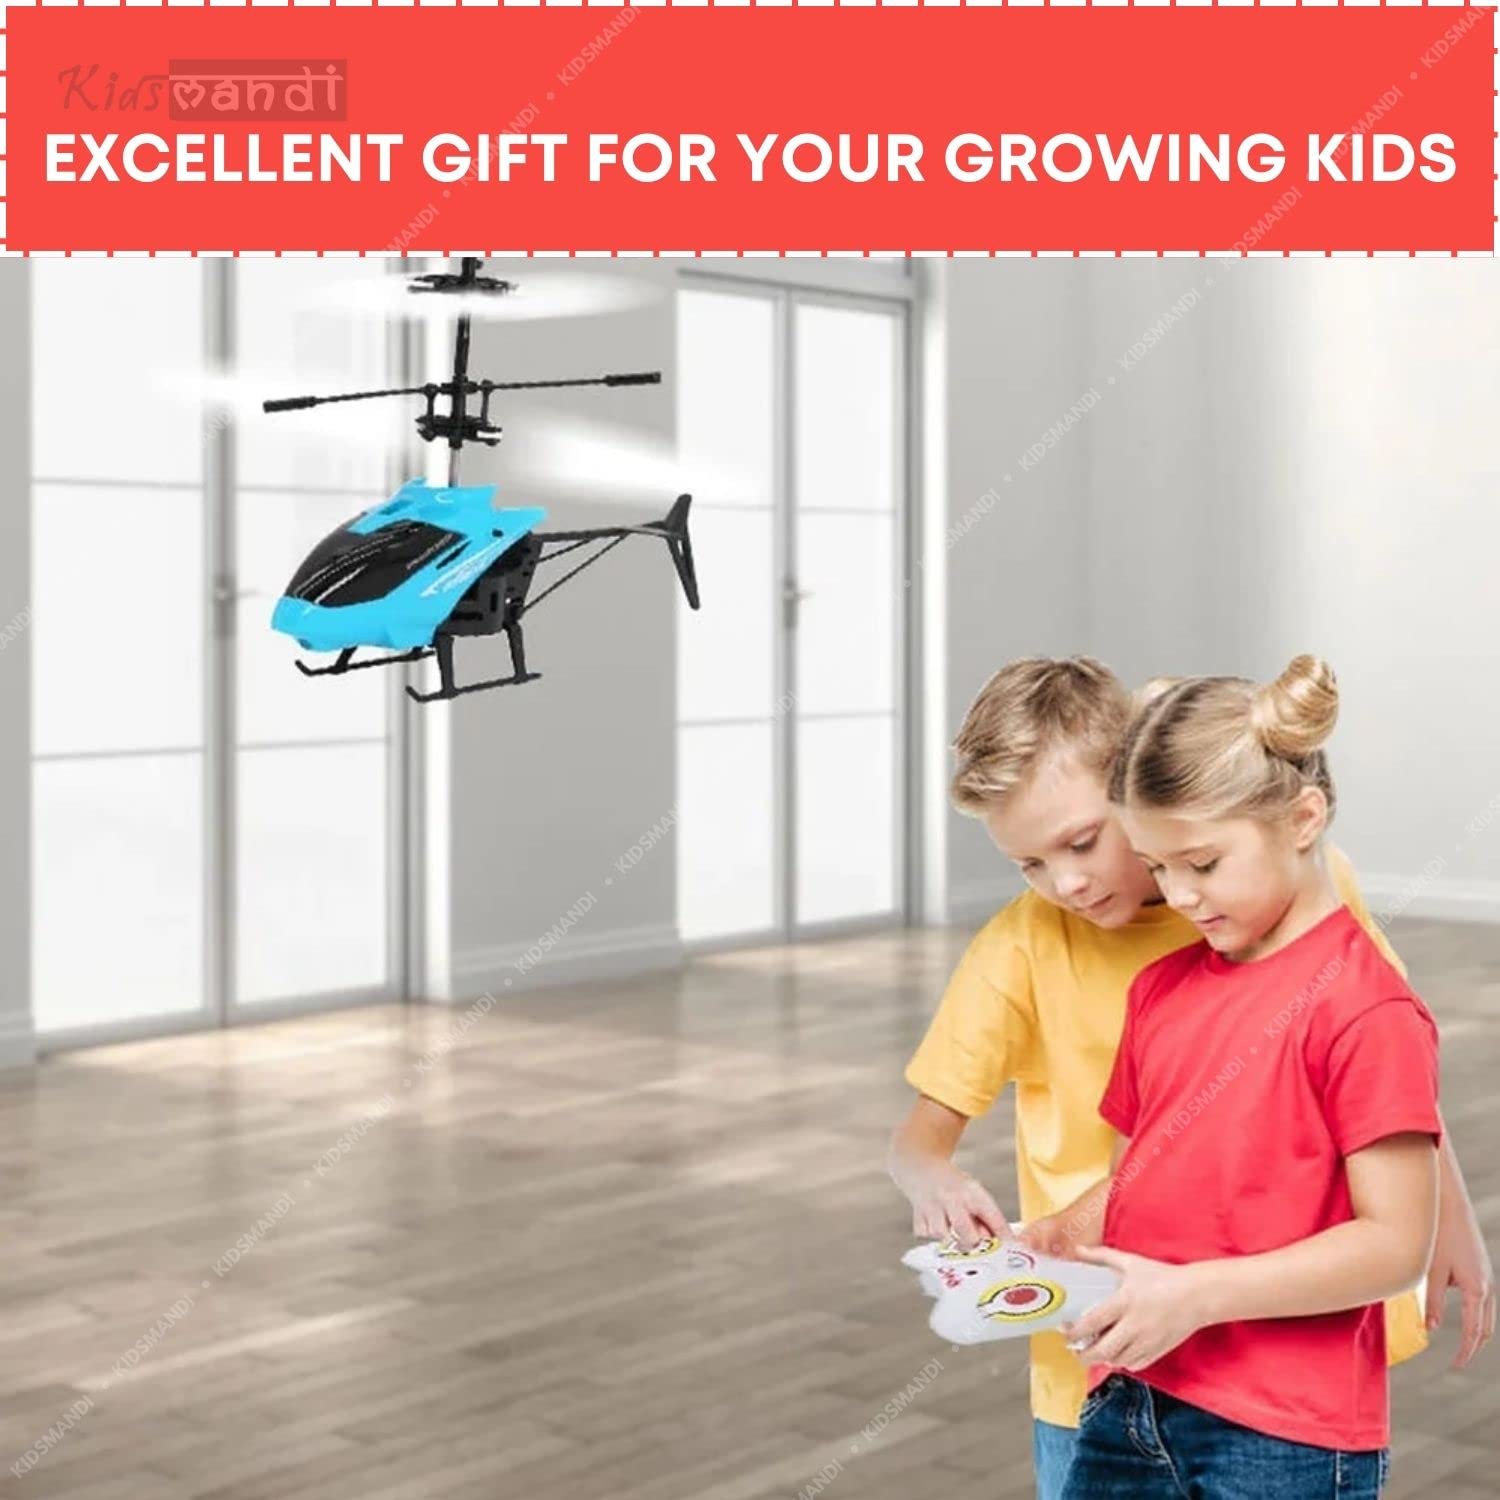 Kids Mandi Remote Control Helicopter for indoor and outdoor play.